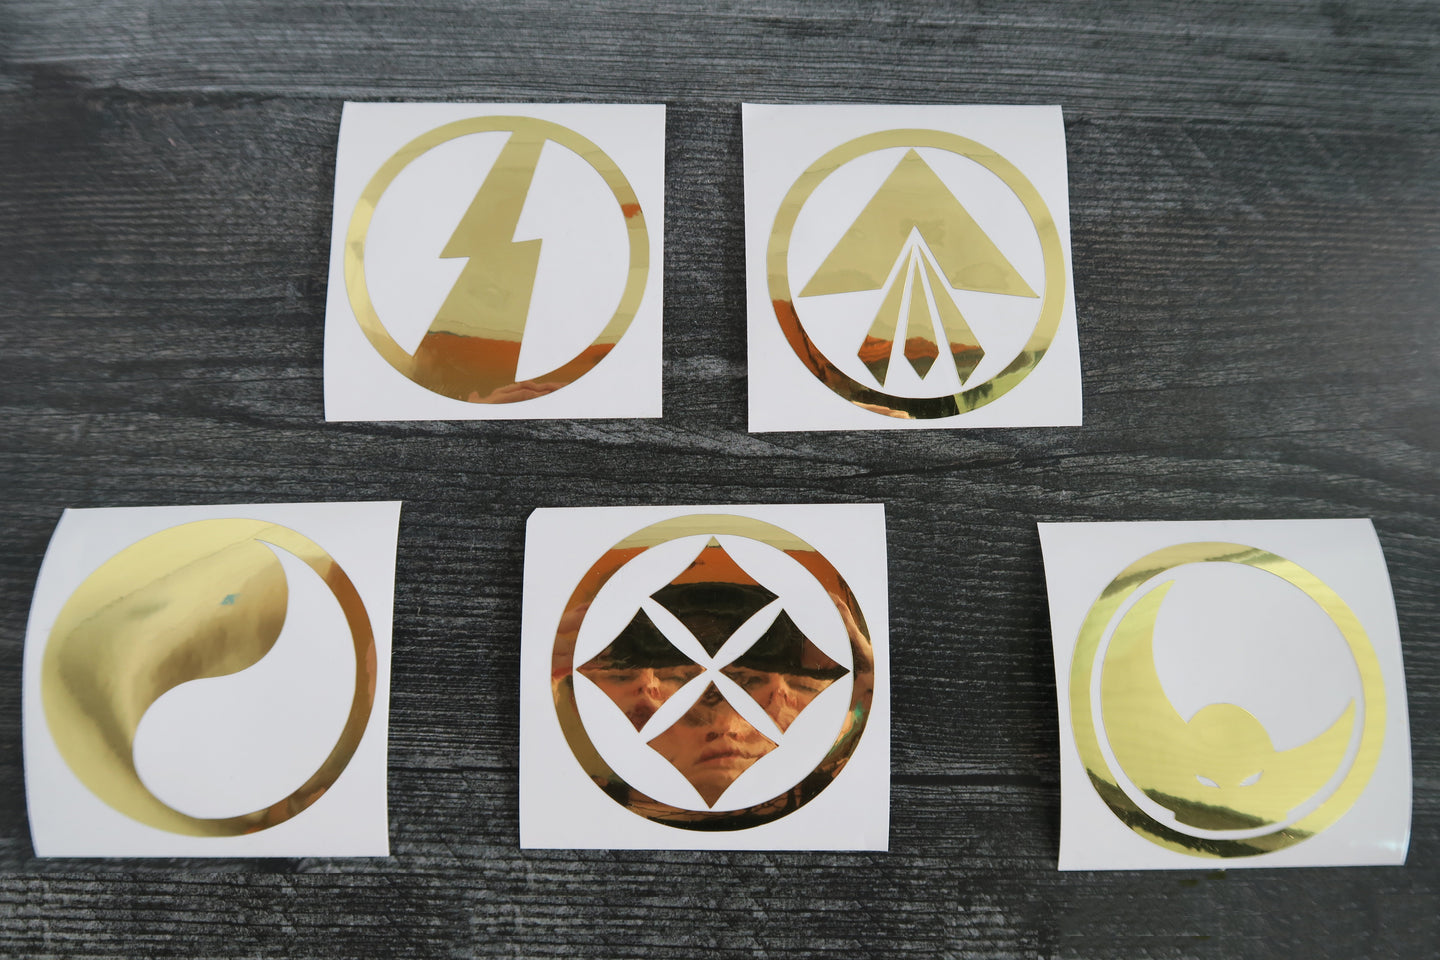 SET of 5 - Ronin Armor - Decals/Stickers